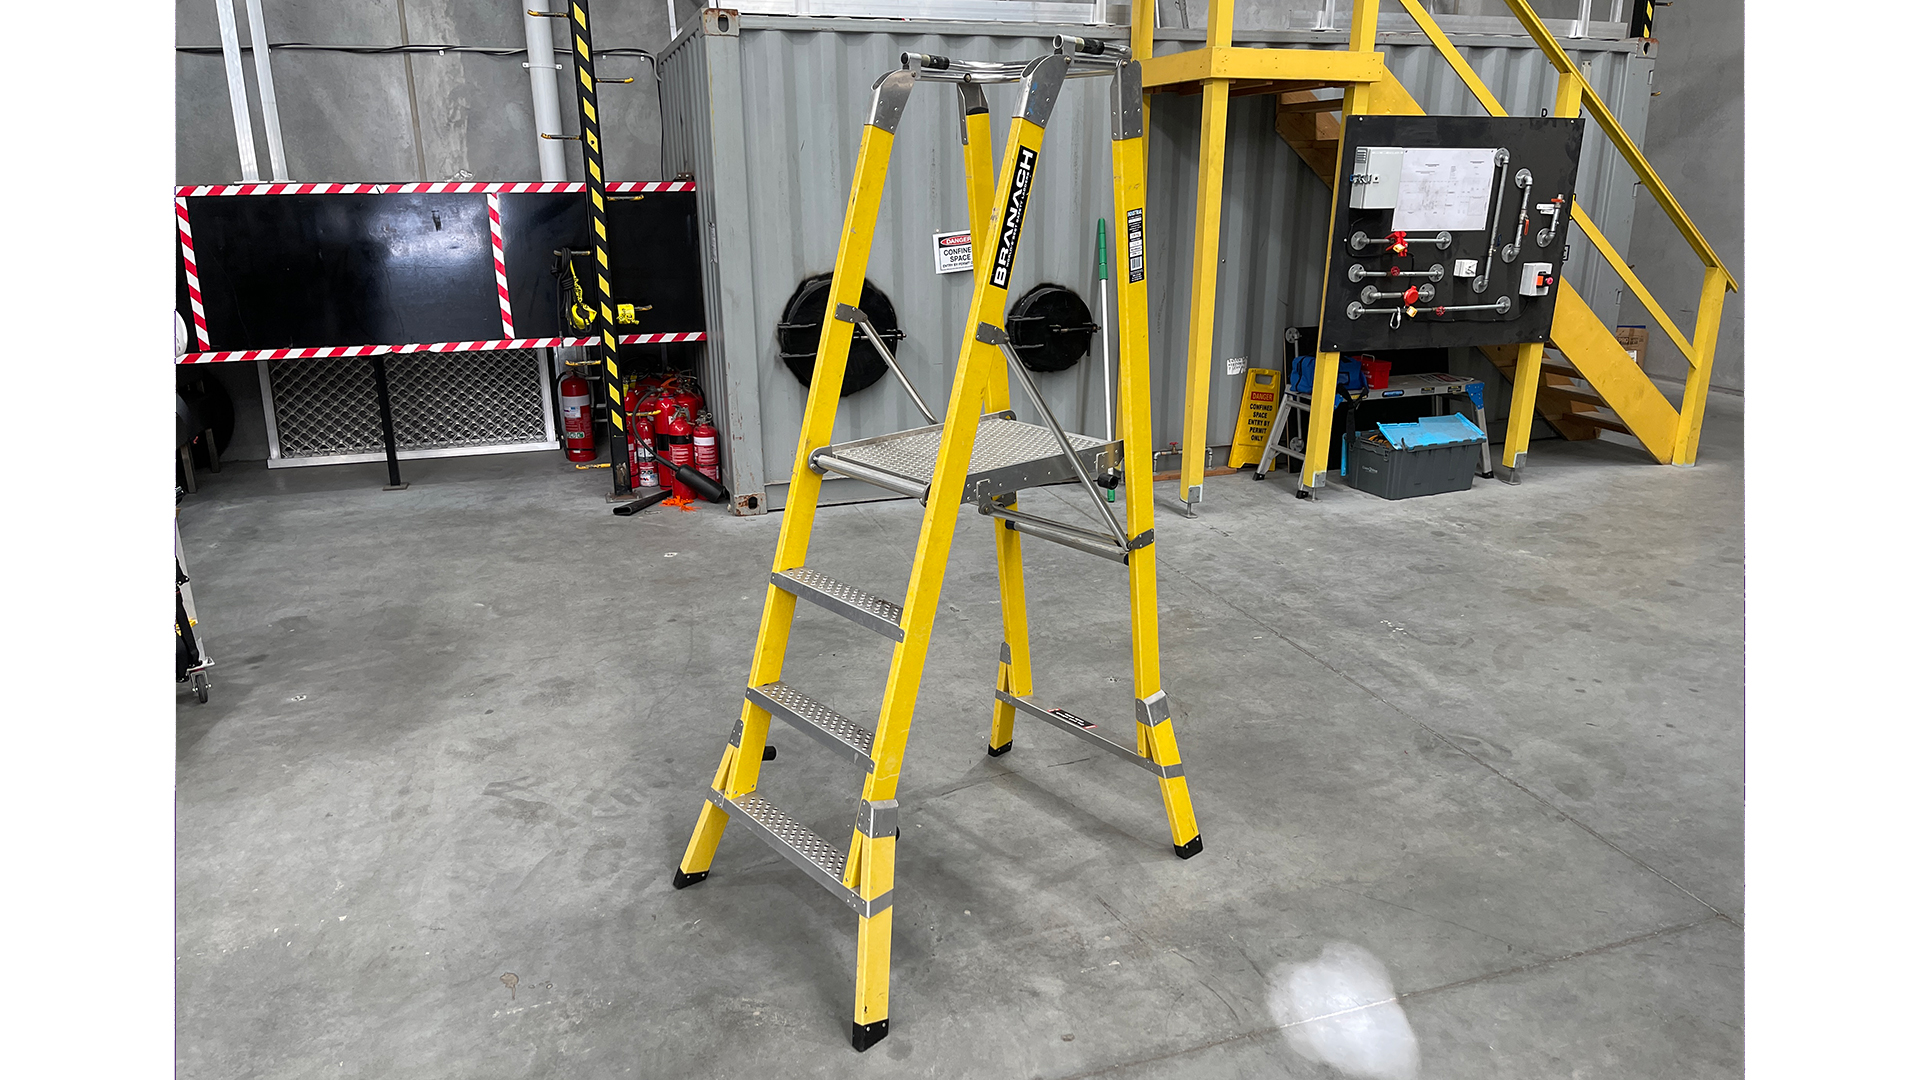 7 portable ladder safety tips